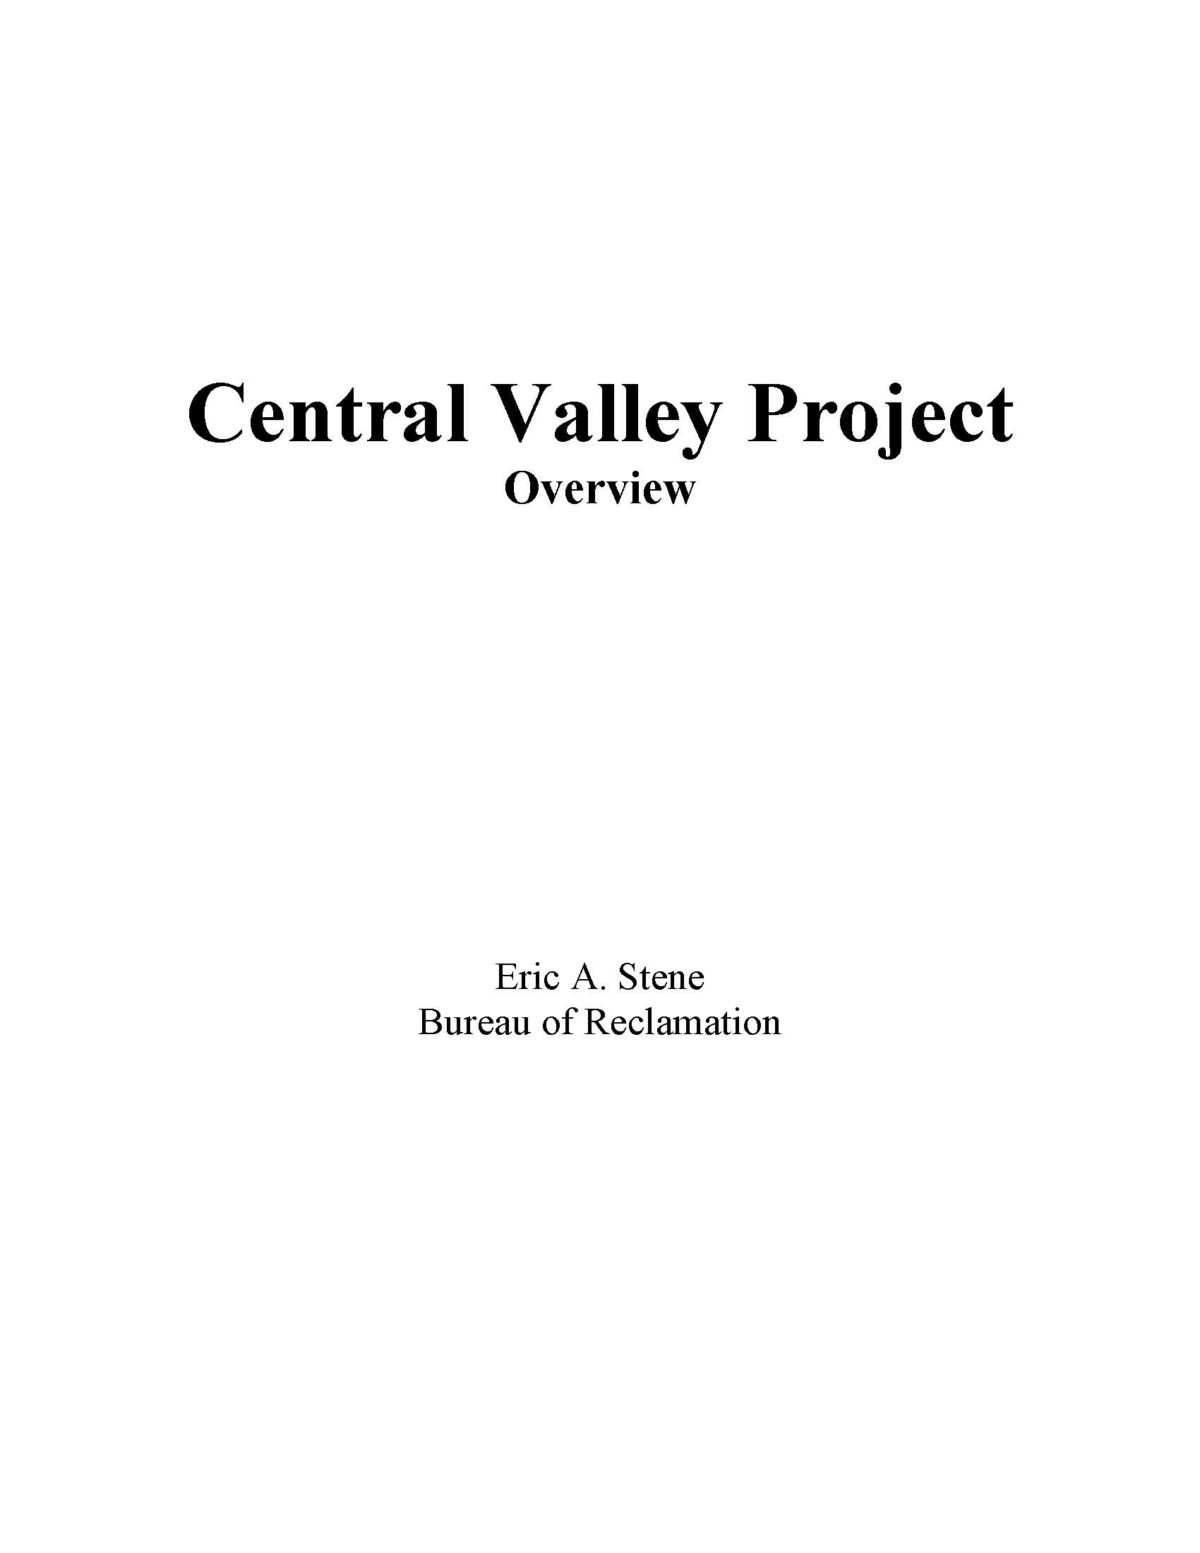 Central Valley Project Overview